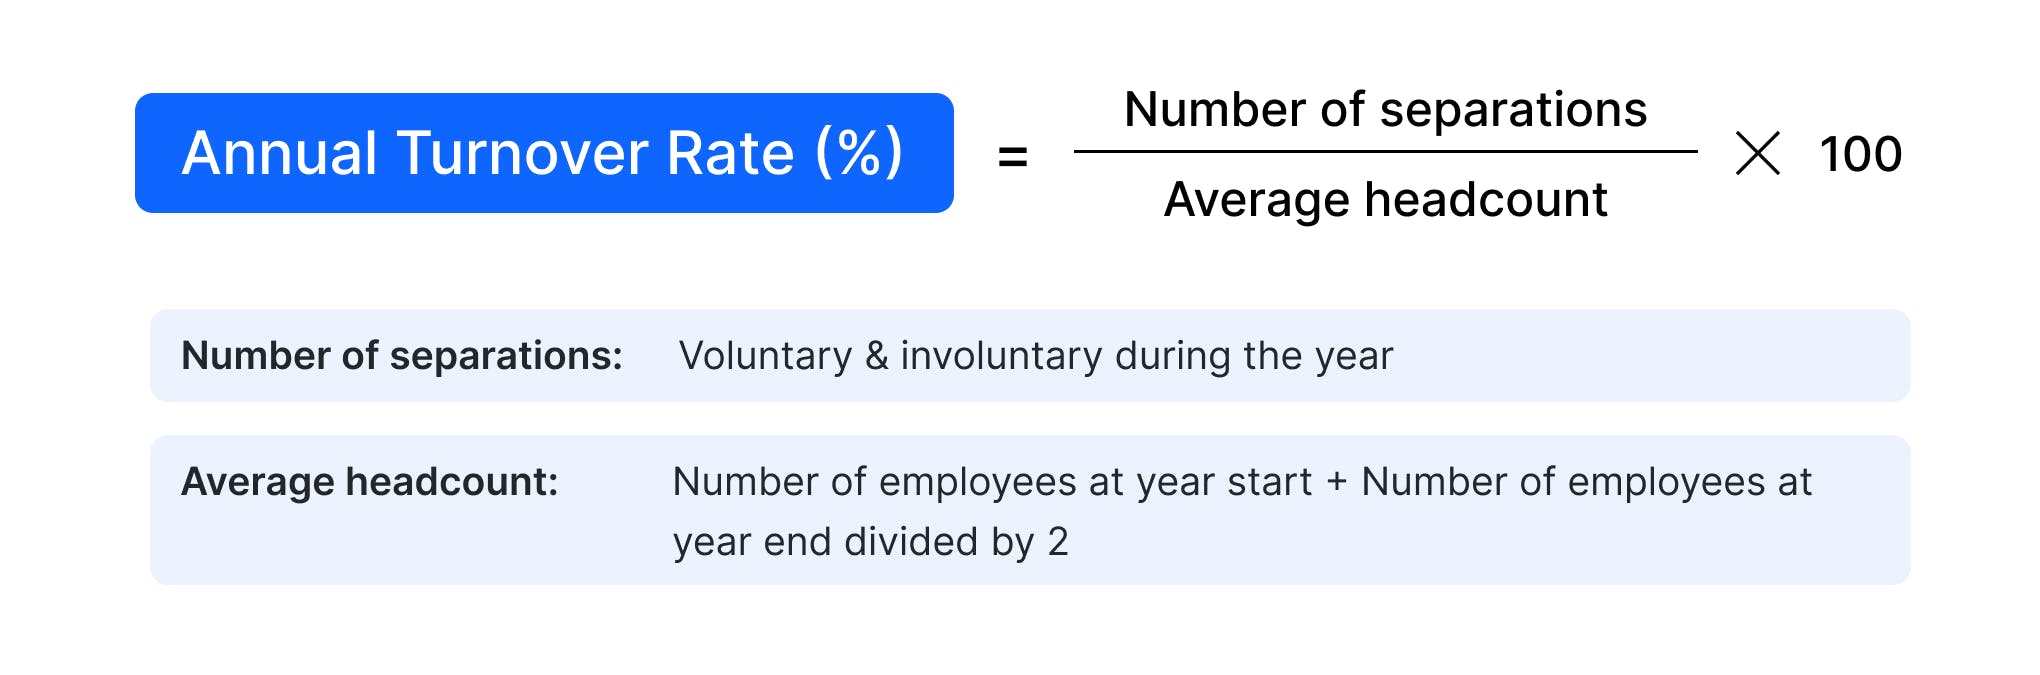 Annual turnover rate (%) = (number of separations / average headcount) x 100